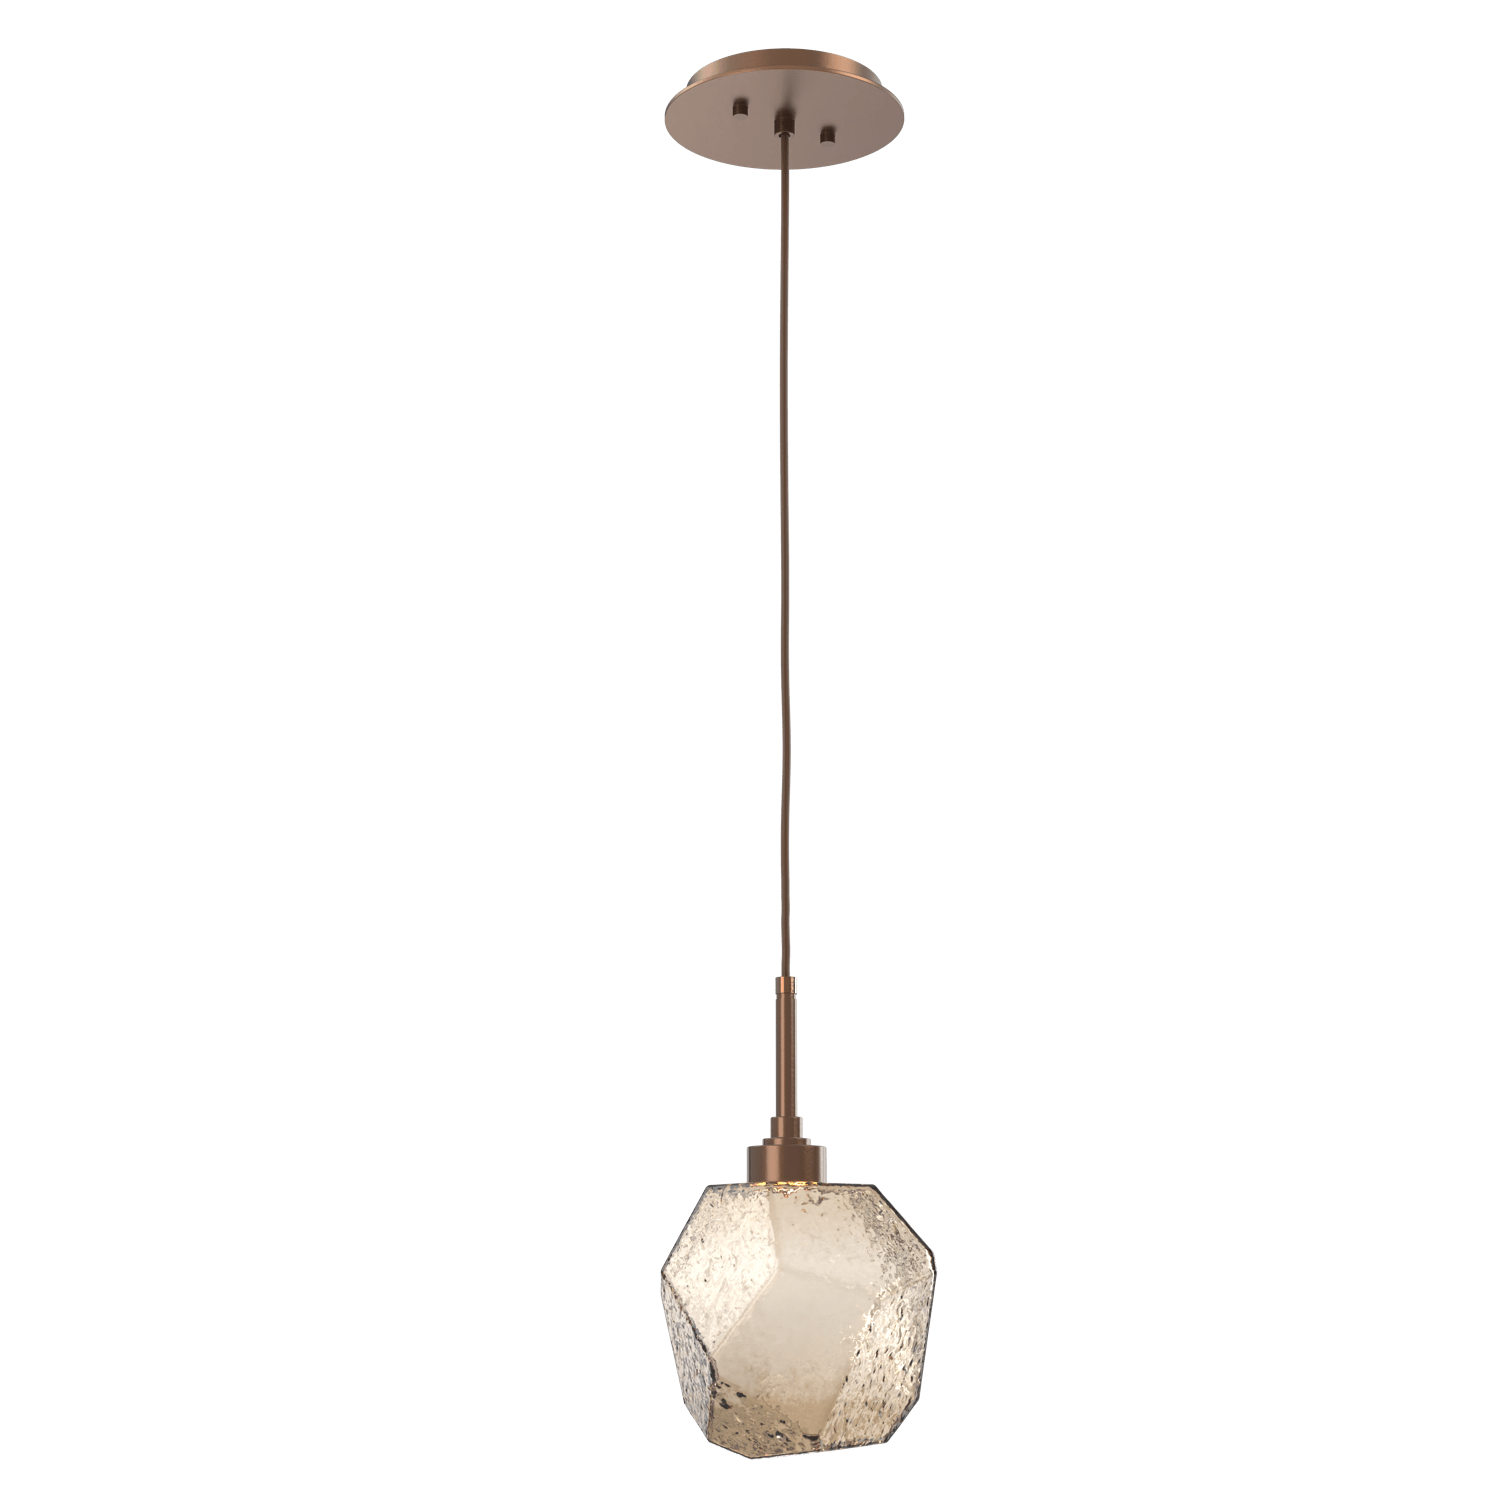 LAB0039-01-BB-B-Hammerton-Studio-Gem-pendant-light-with-burnished-bronze-finish-and-bronze-blown-glass-shades-and-LED-lamping